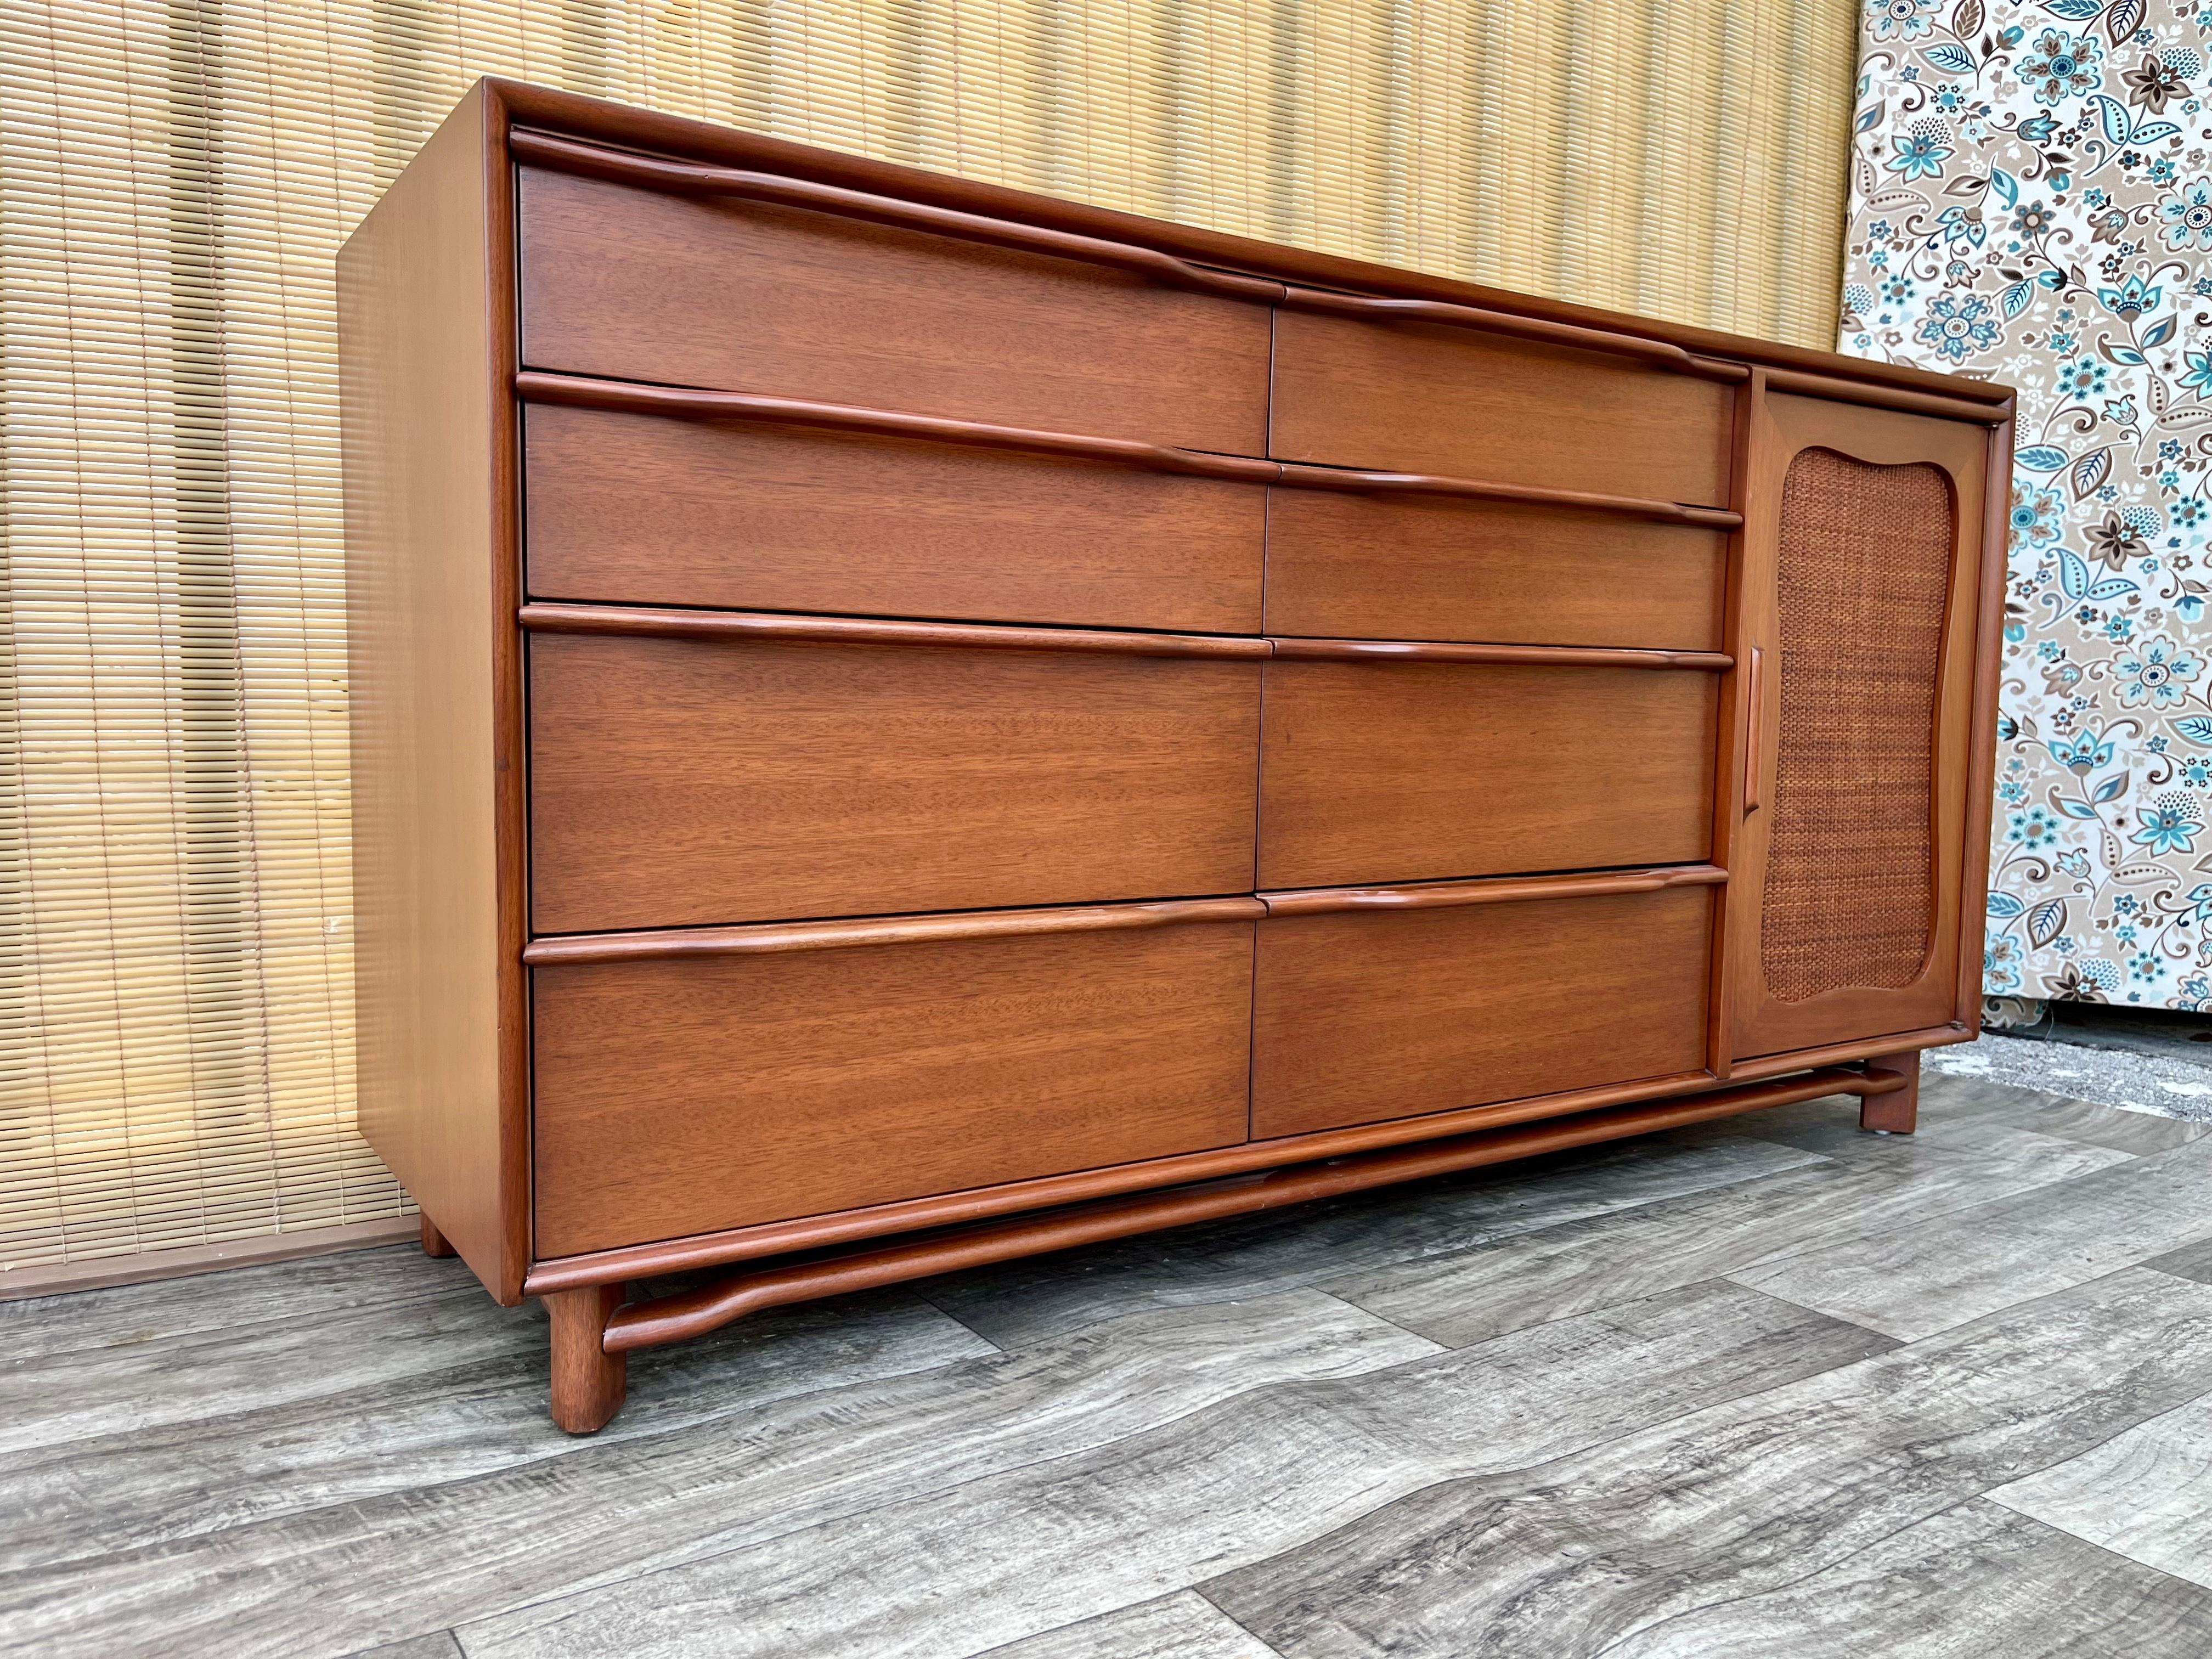 Vintage Fully Refinished Mid Century Modern Dresser by Hickory Manufacturing Company. North Carolina. Circa 1960s
Features a quintessential Clean lines Mid Century Modern Design and eight drawers with dovetail joints and solid wood sculpted handles,